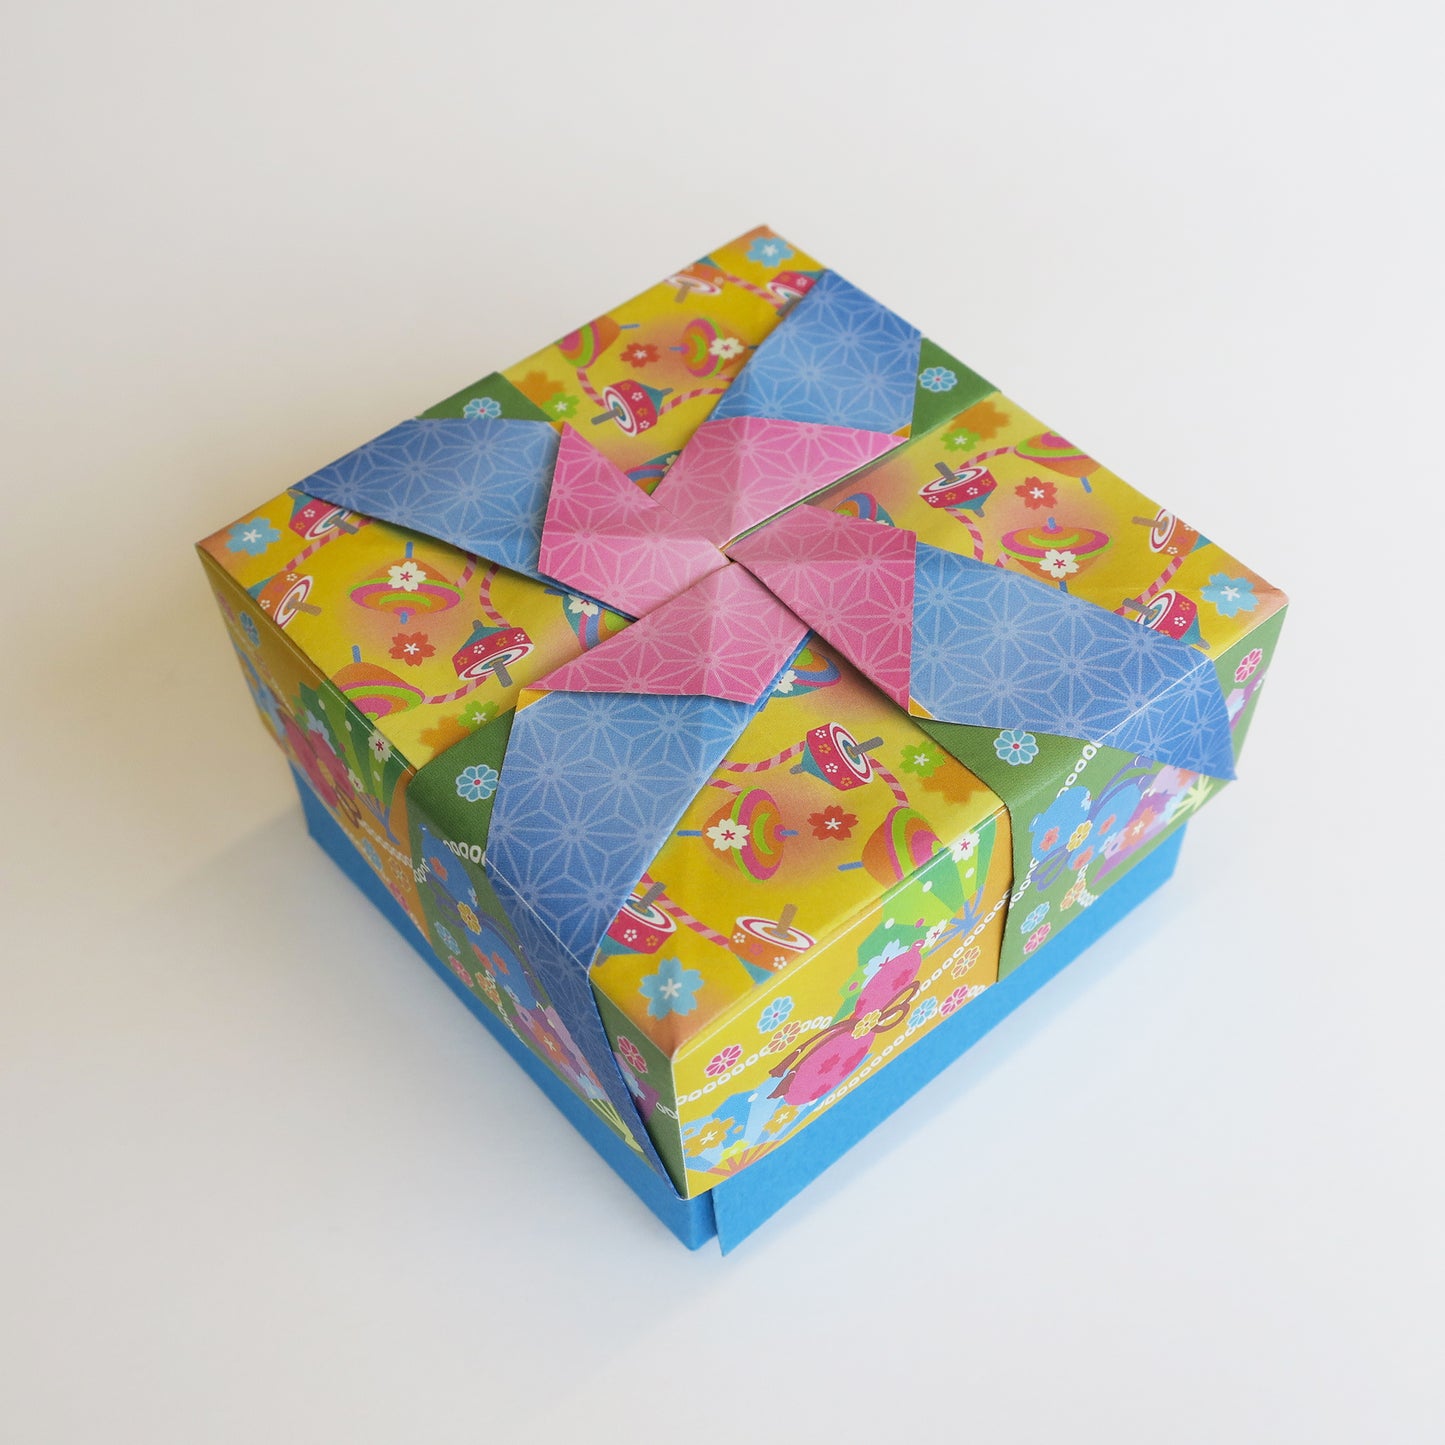 Trinket Origami, Make 5 Different Origami Boxes, 15x15cm